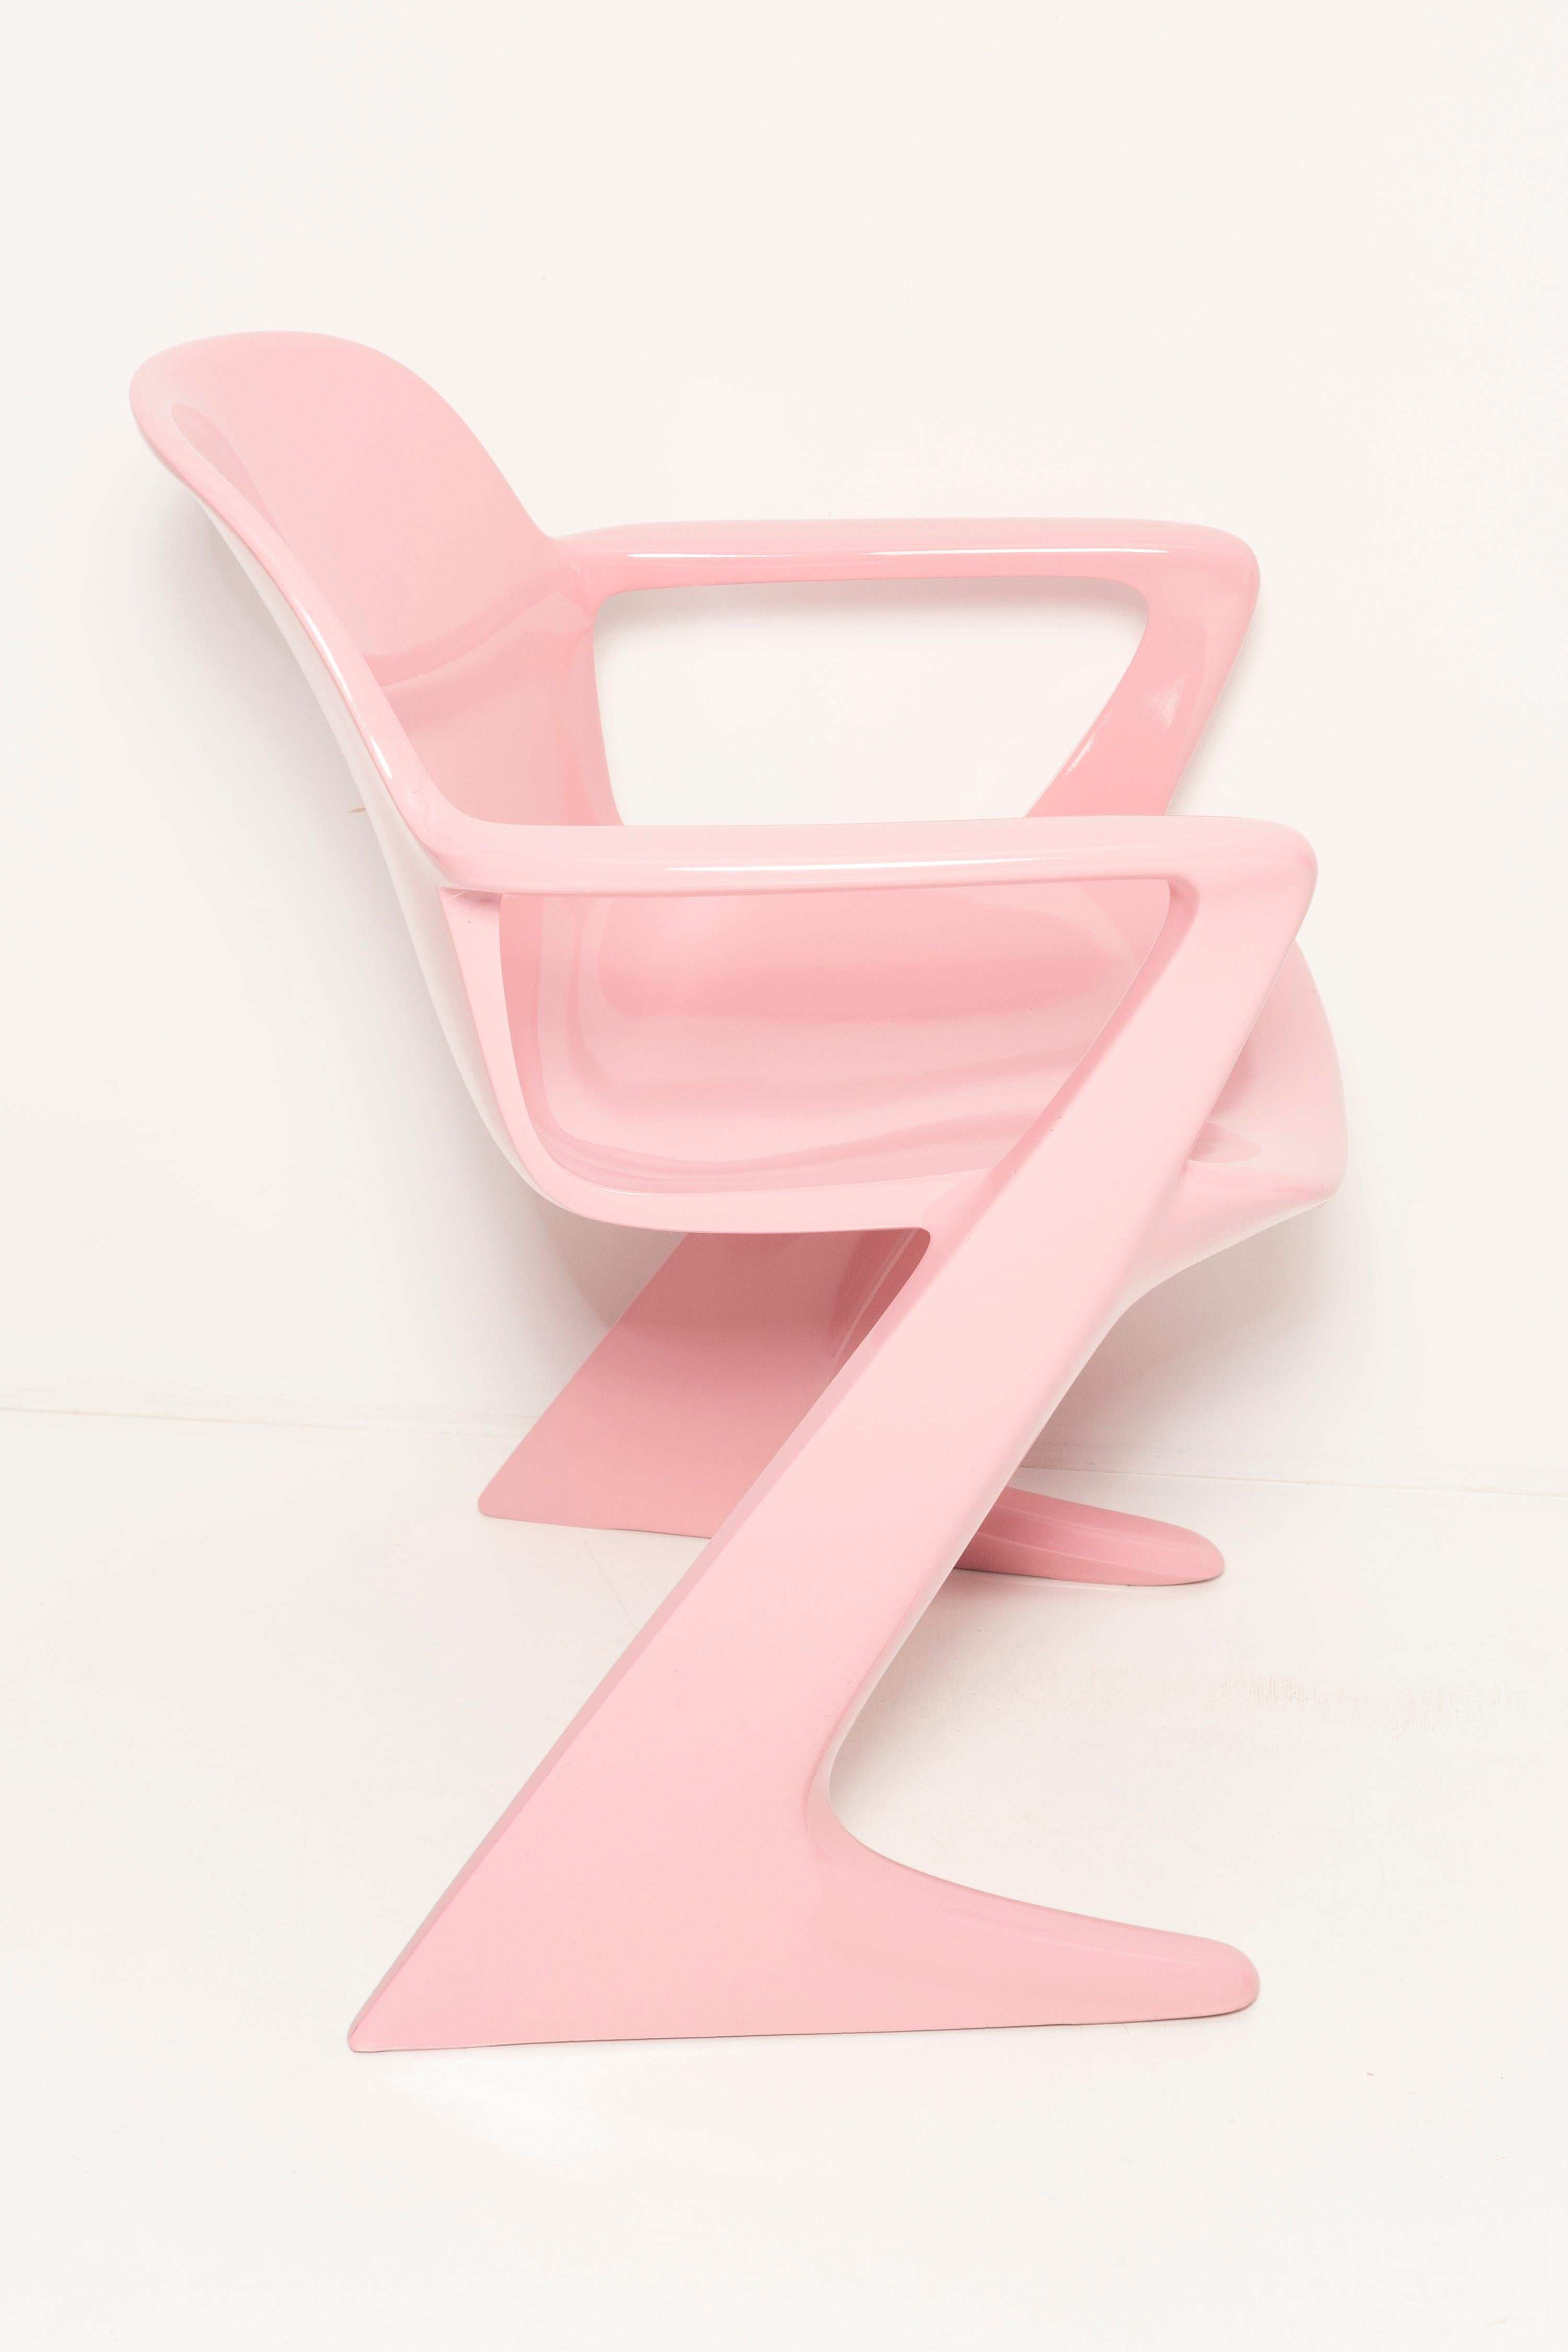 Mid-Century Light Pink Kangaroo Chair Designed by Ernst Moeckl, Germany, 1968 For Sale 1